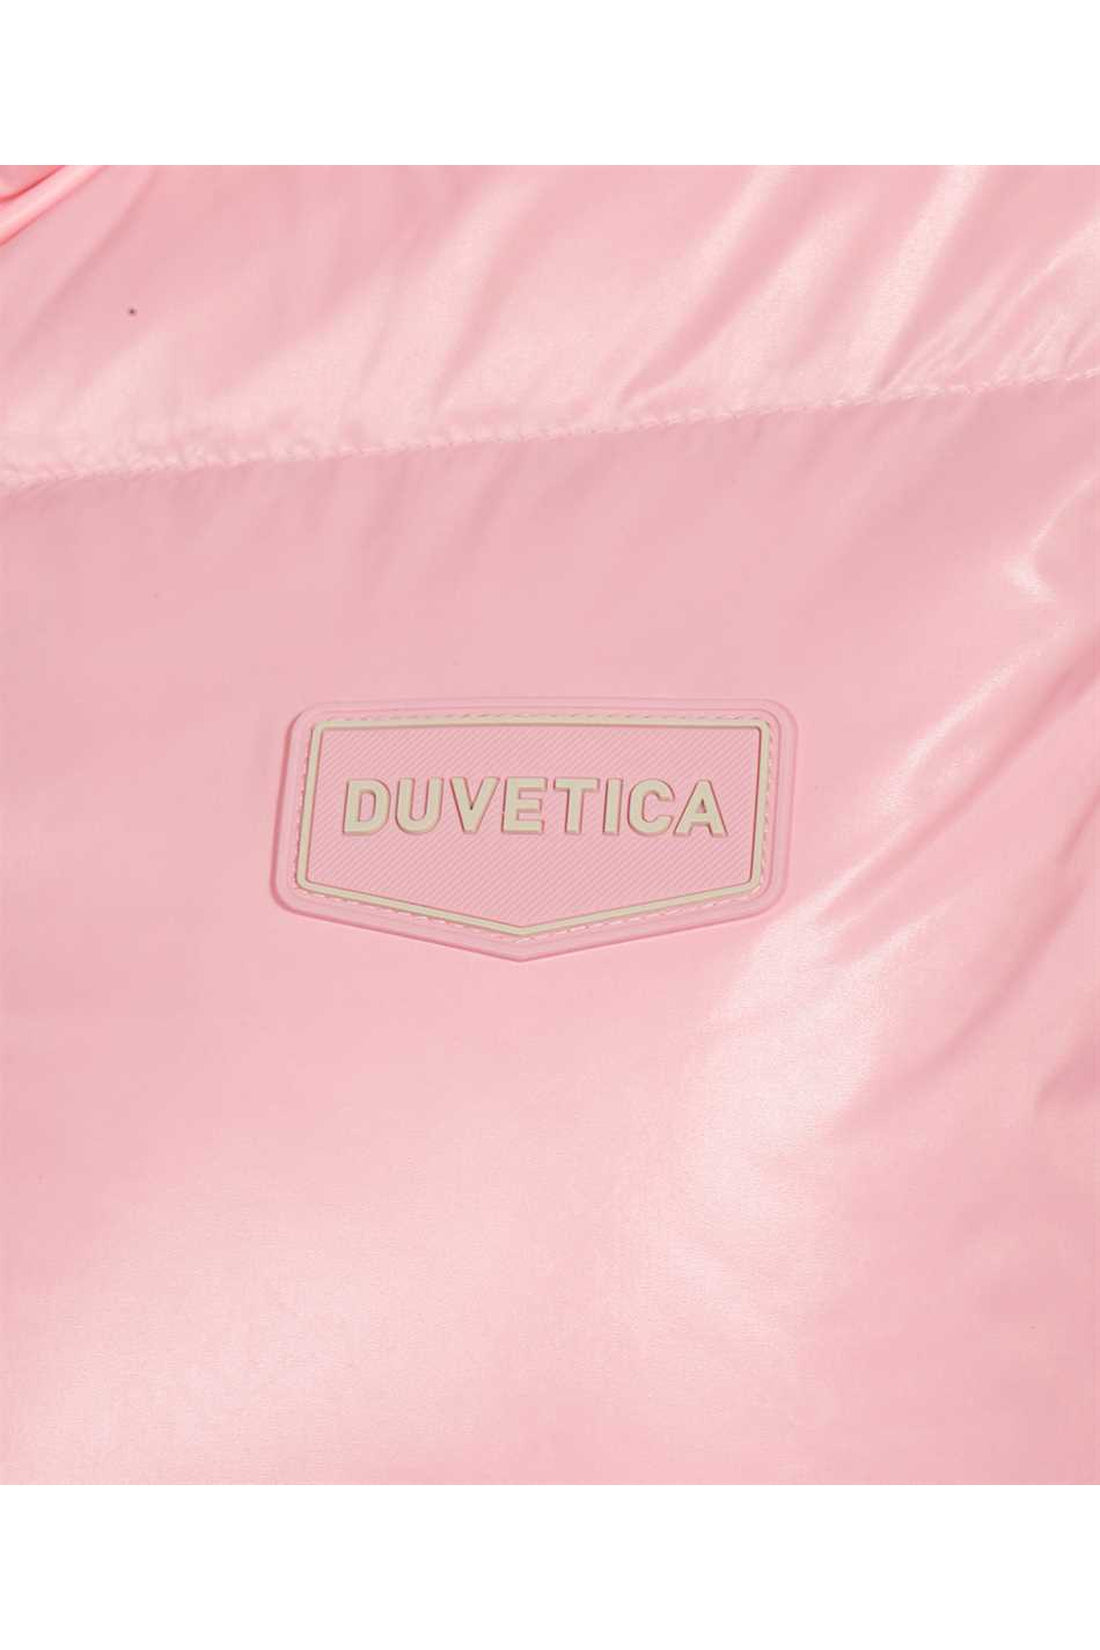 Duvetica-OUTLET-SALE-Long hooded full-zip down jacket-ARCHIVIST